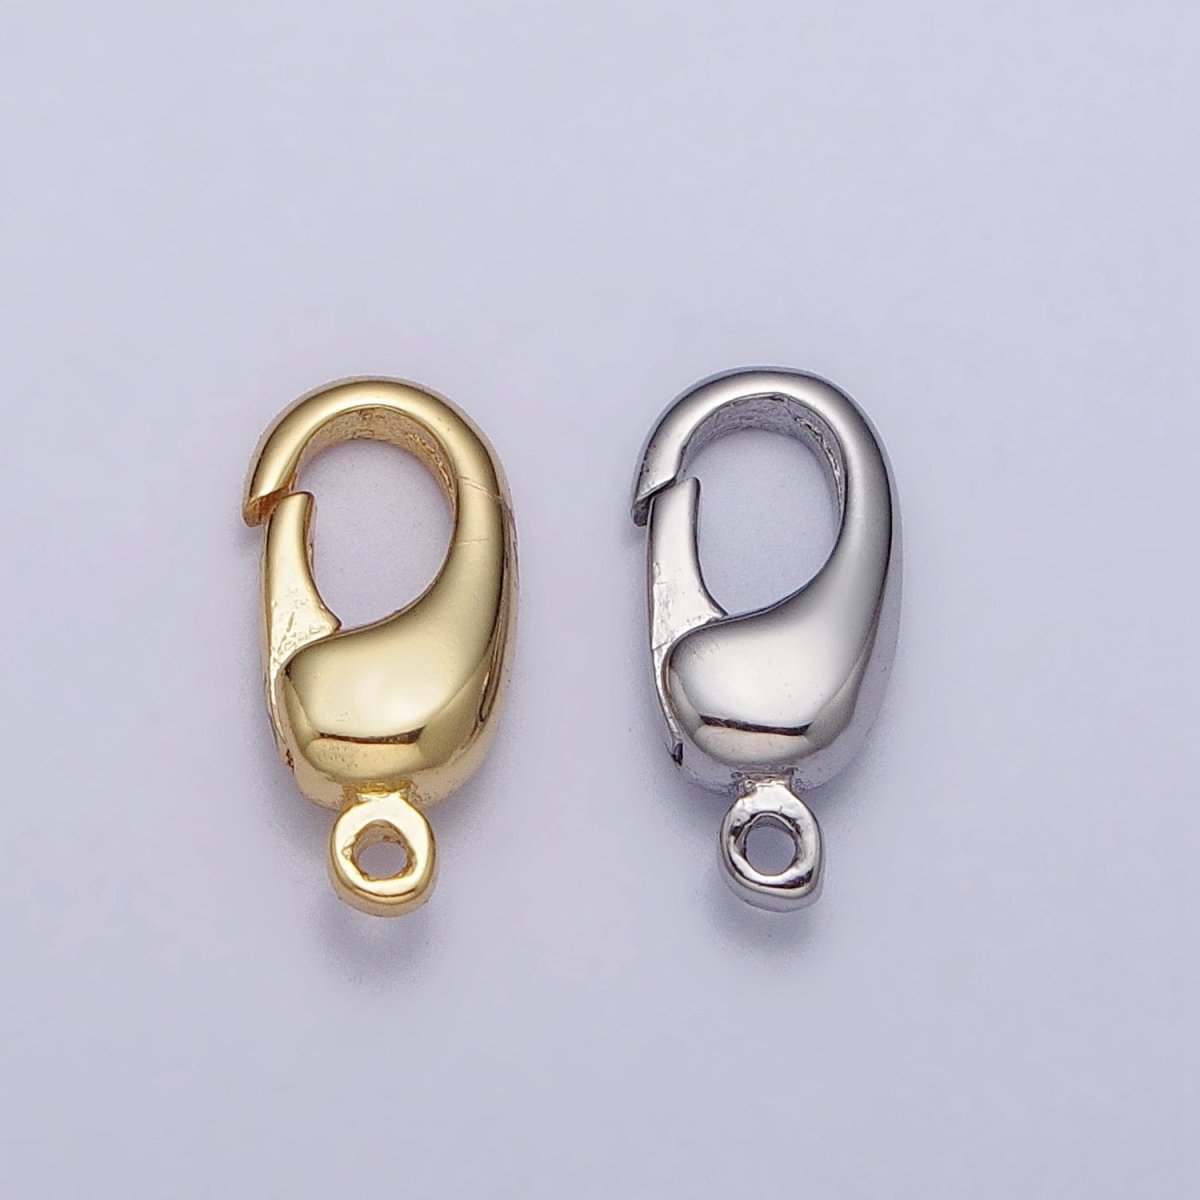 Mini Gold Push Clasp Wholesale Lobster Clasp Silver Lobster Claw for Jewelry Necklace Bracelet Anklet Making, Size 10.5 x 4.9mm Z-151 Z-152 - DLUXCA